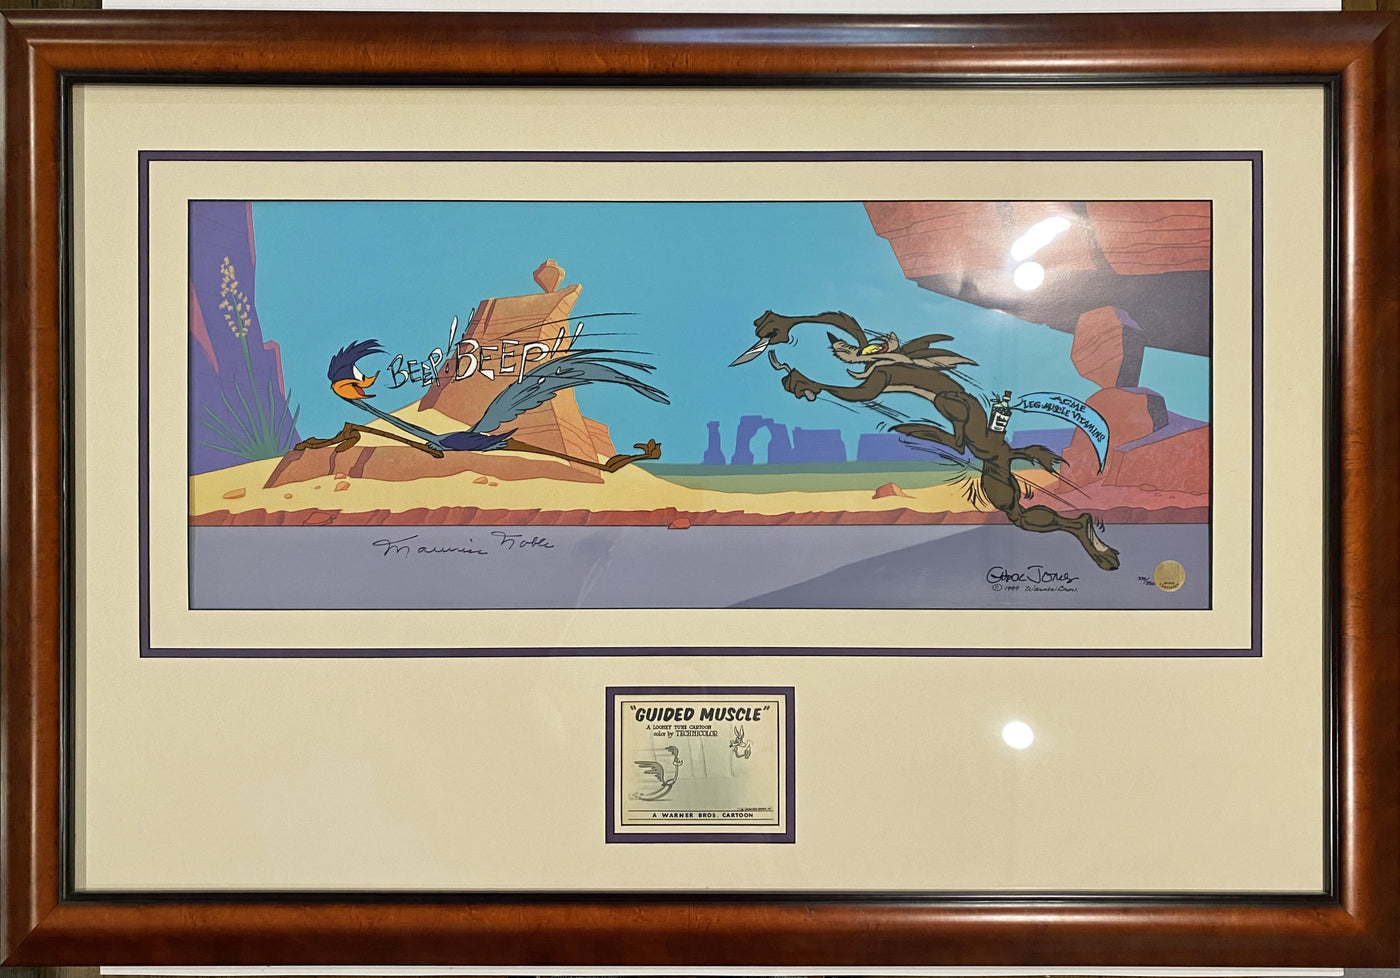 Warner Brothers Limited Edition Cel "Misguided Muscle" Signed By Chuck Jones